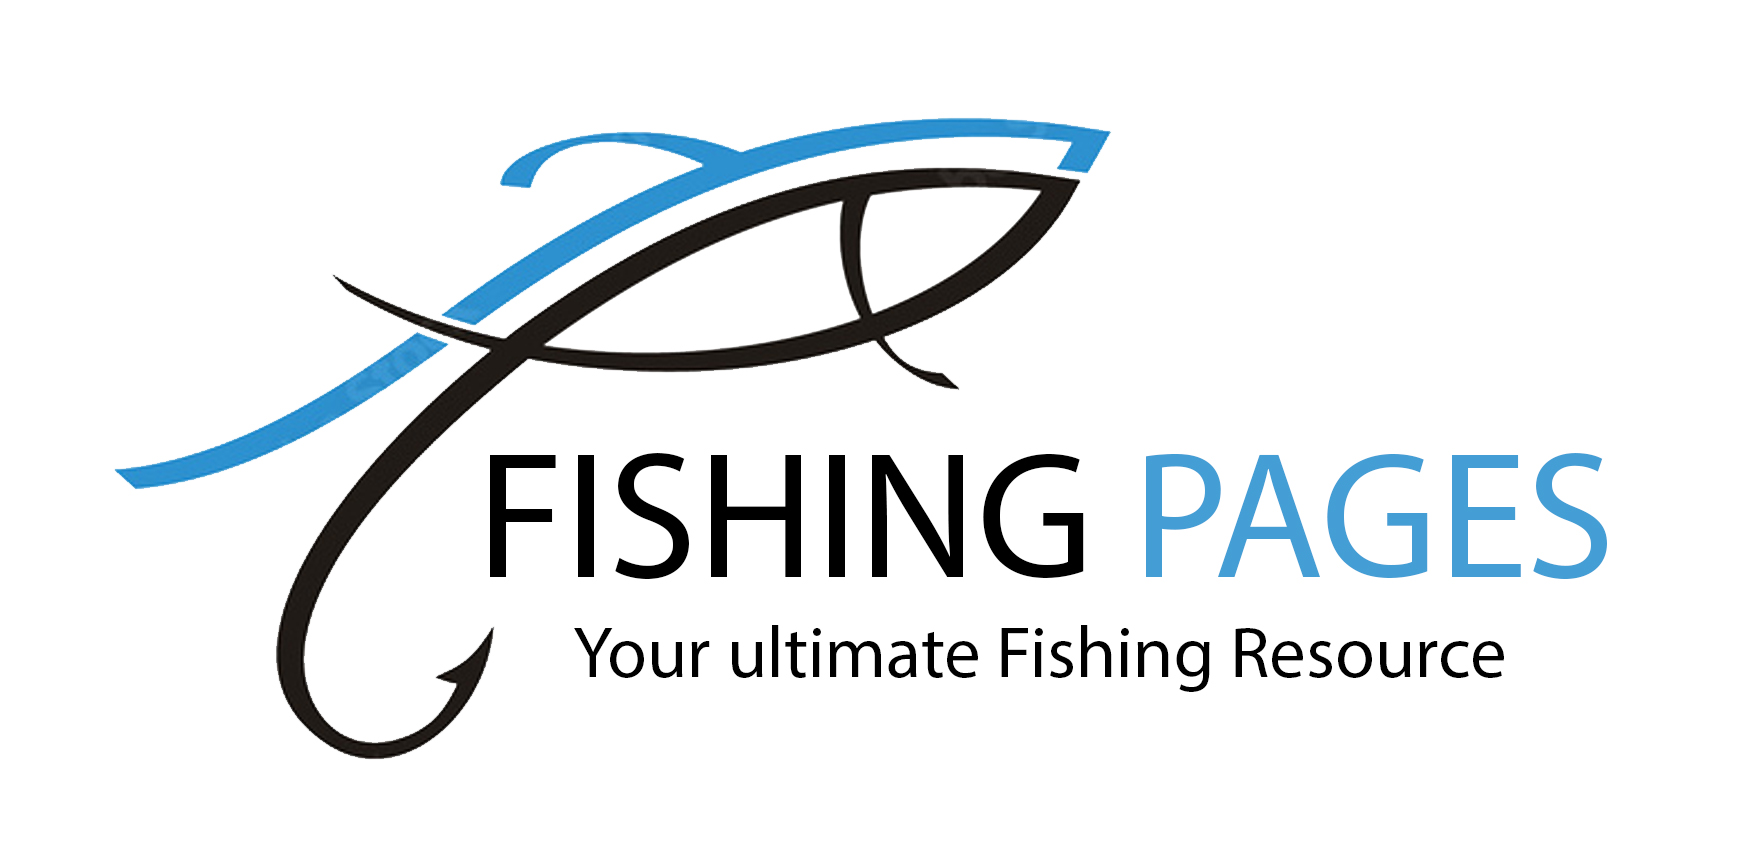 Launch of the FishingPages website